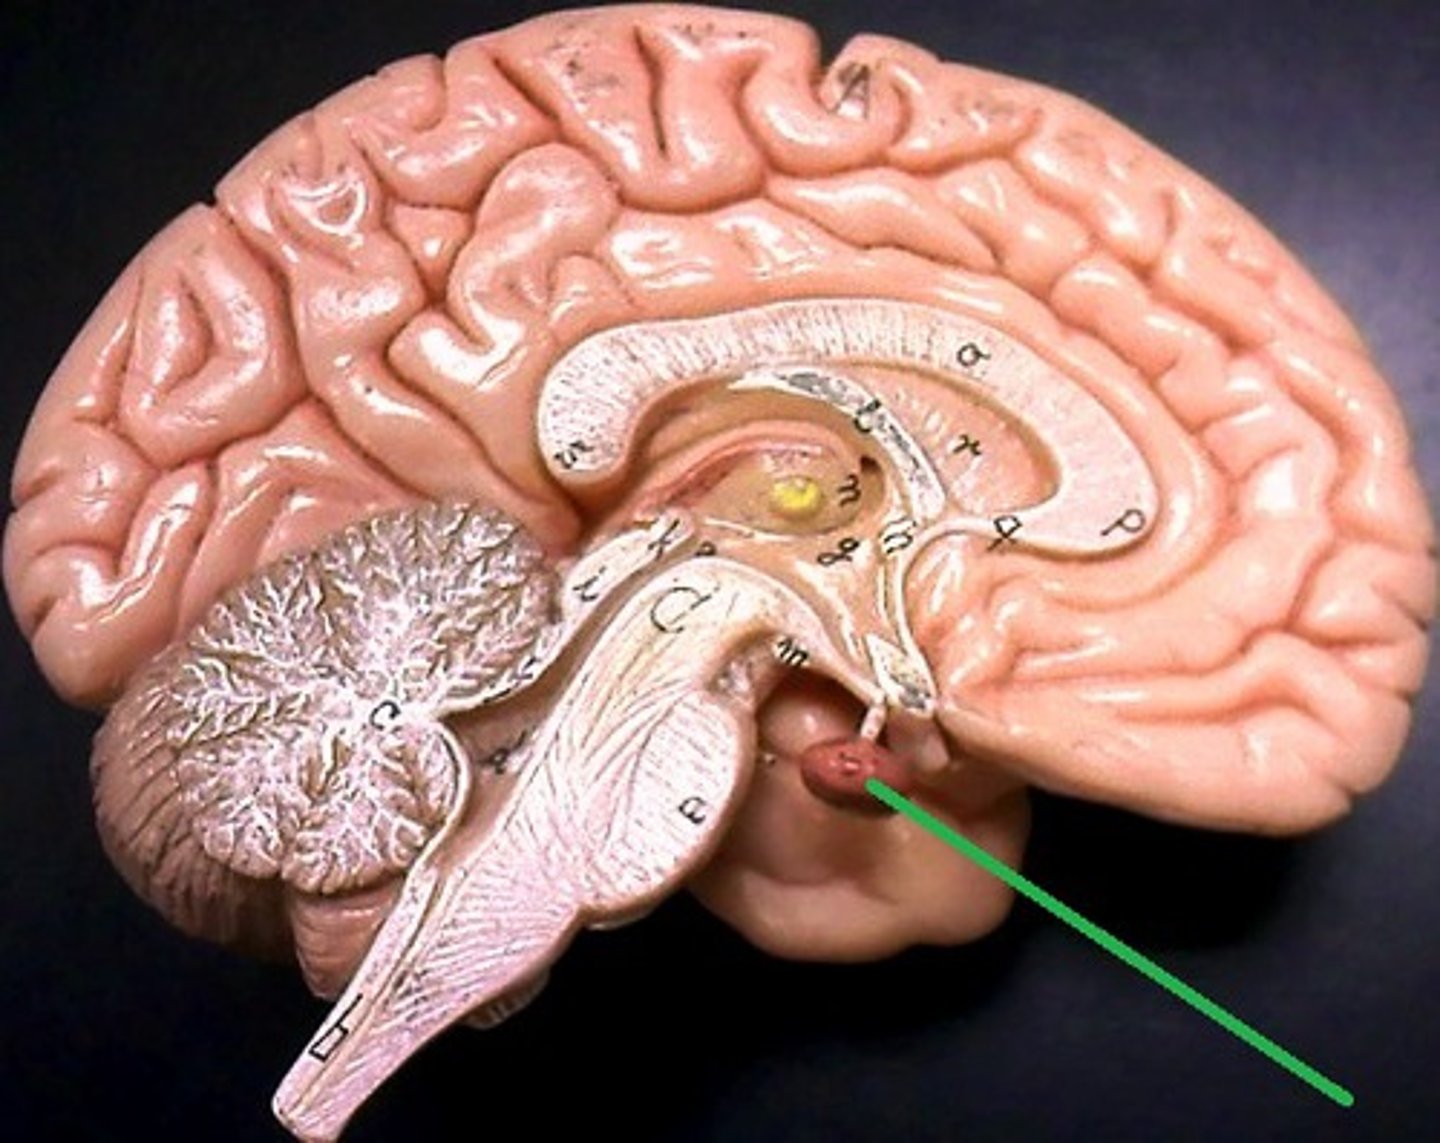 <p>gland located below the thalamus and hypothalamus; called the "master gland" of the endocrine system because it controls many other glands</p>